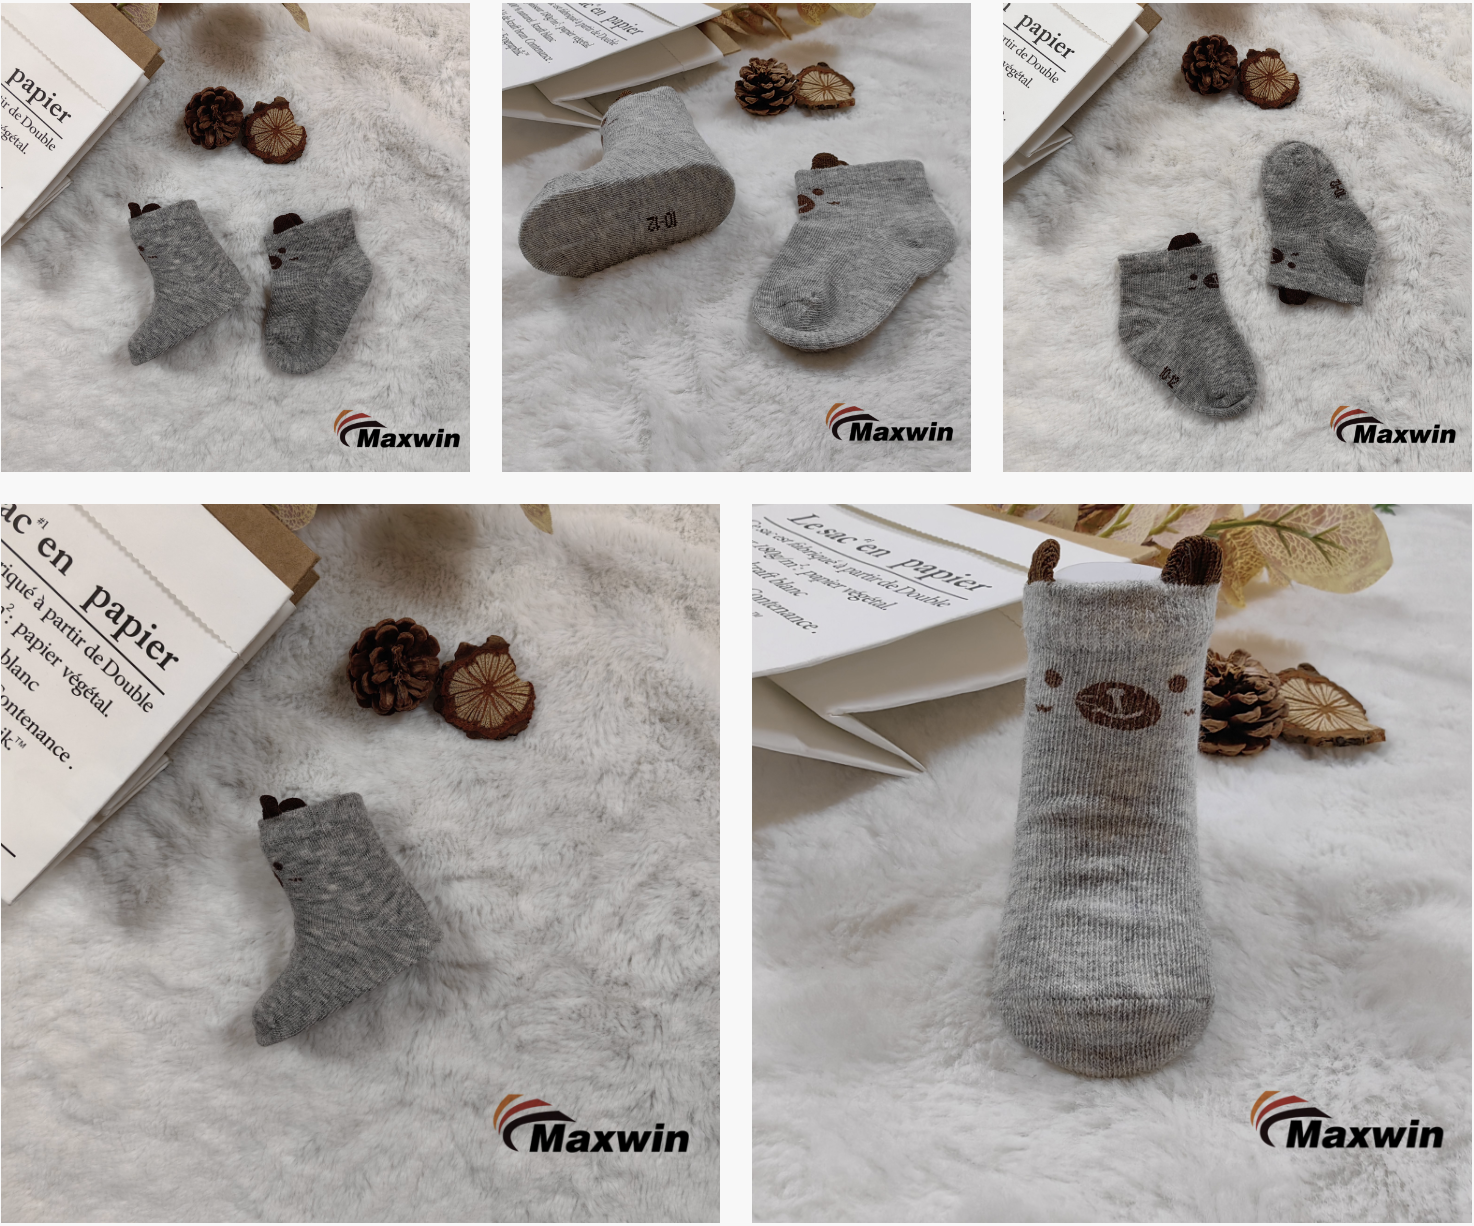 Maxwin’s Children’s Sweat-Absorbing Cotton Socks – The Ideal Comfort for Playful Feet